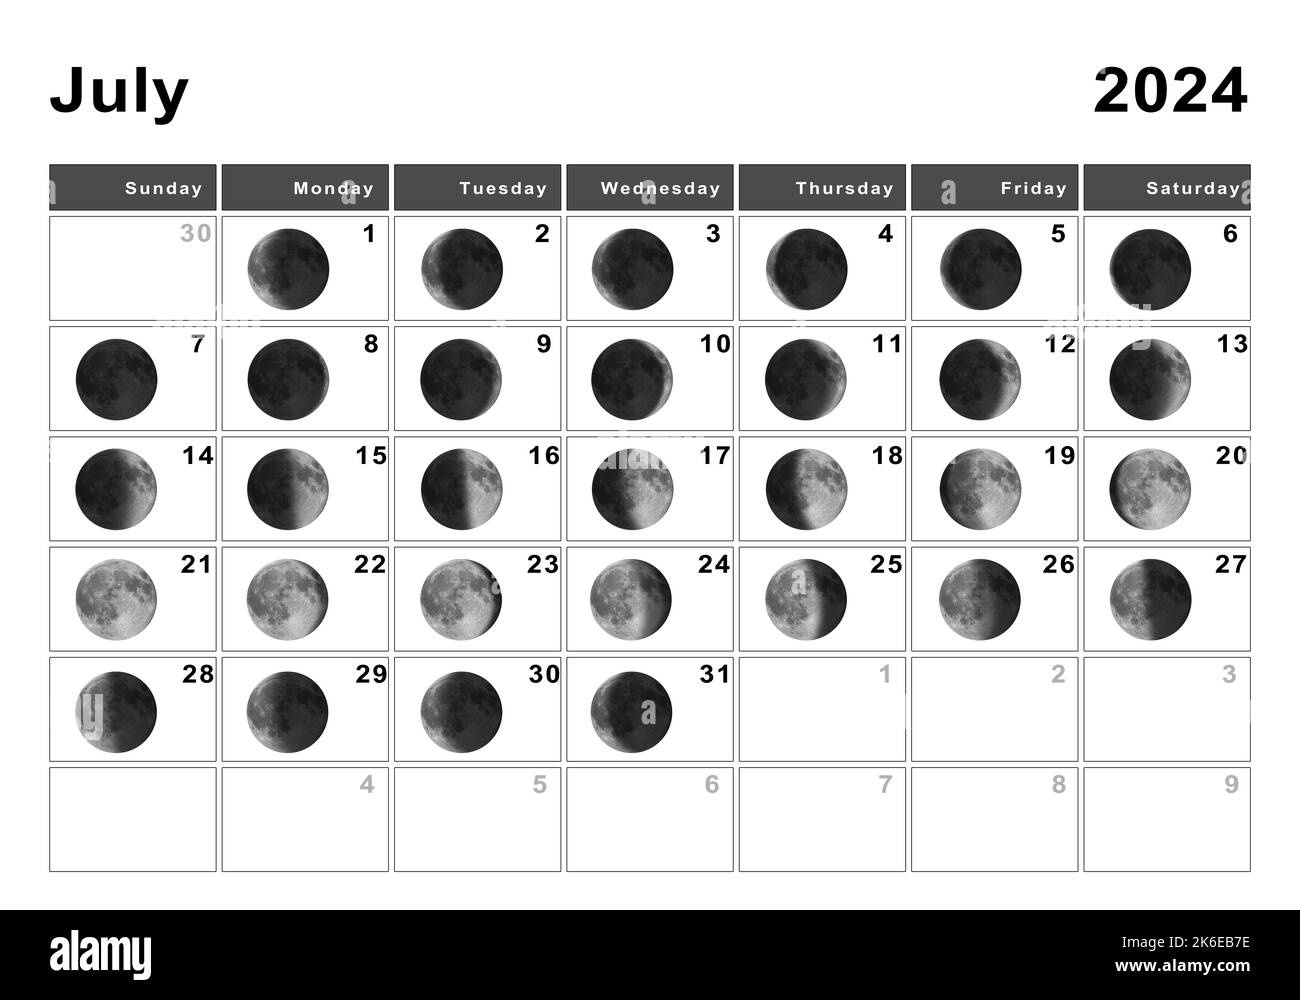 July 2024 Lunar Calendar, Moon Cycles, Moon Phases Stock Photo - Alamy pertaining to 2024 July Moon Calendar